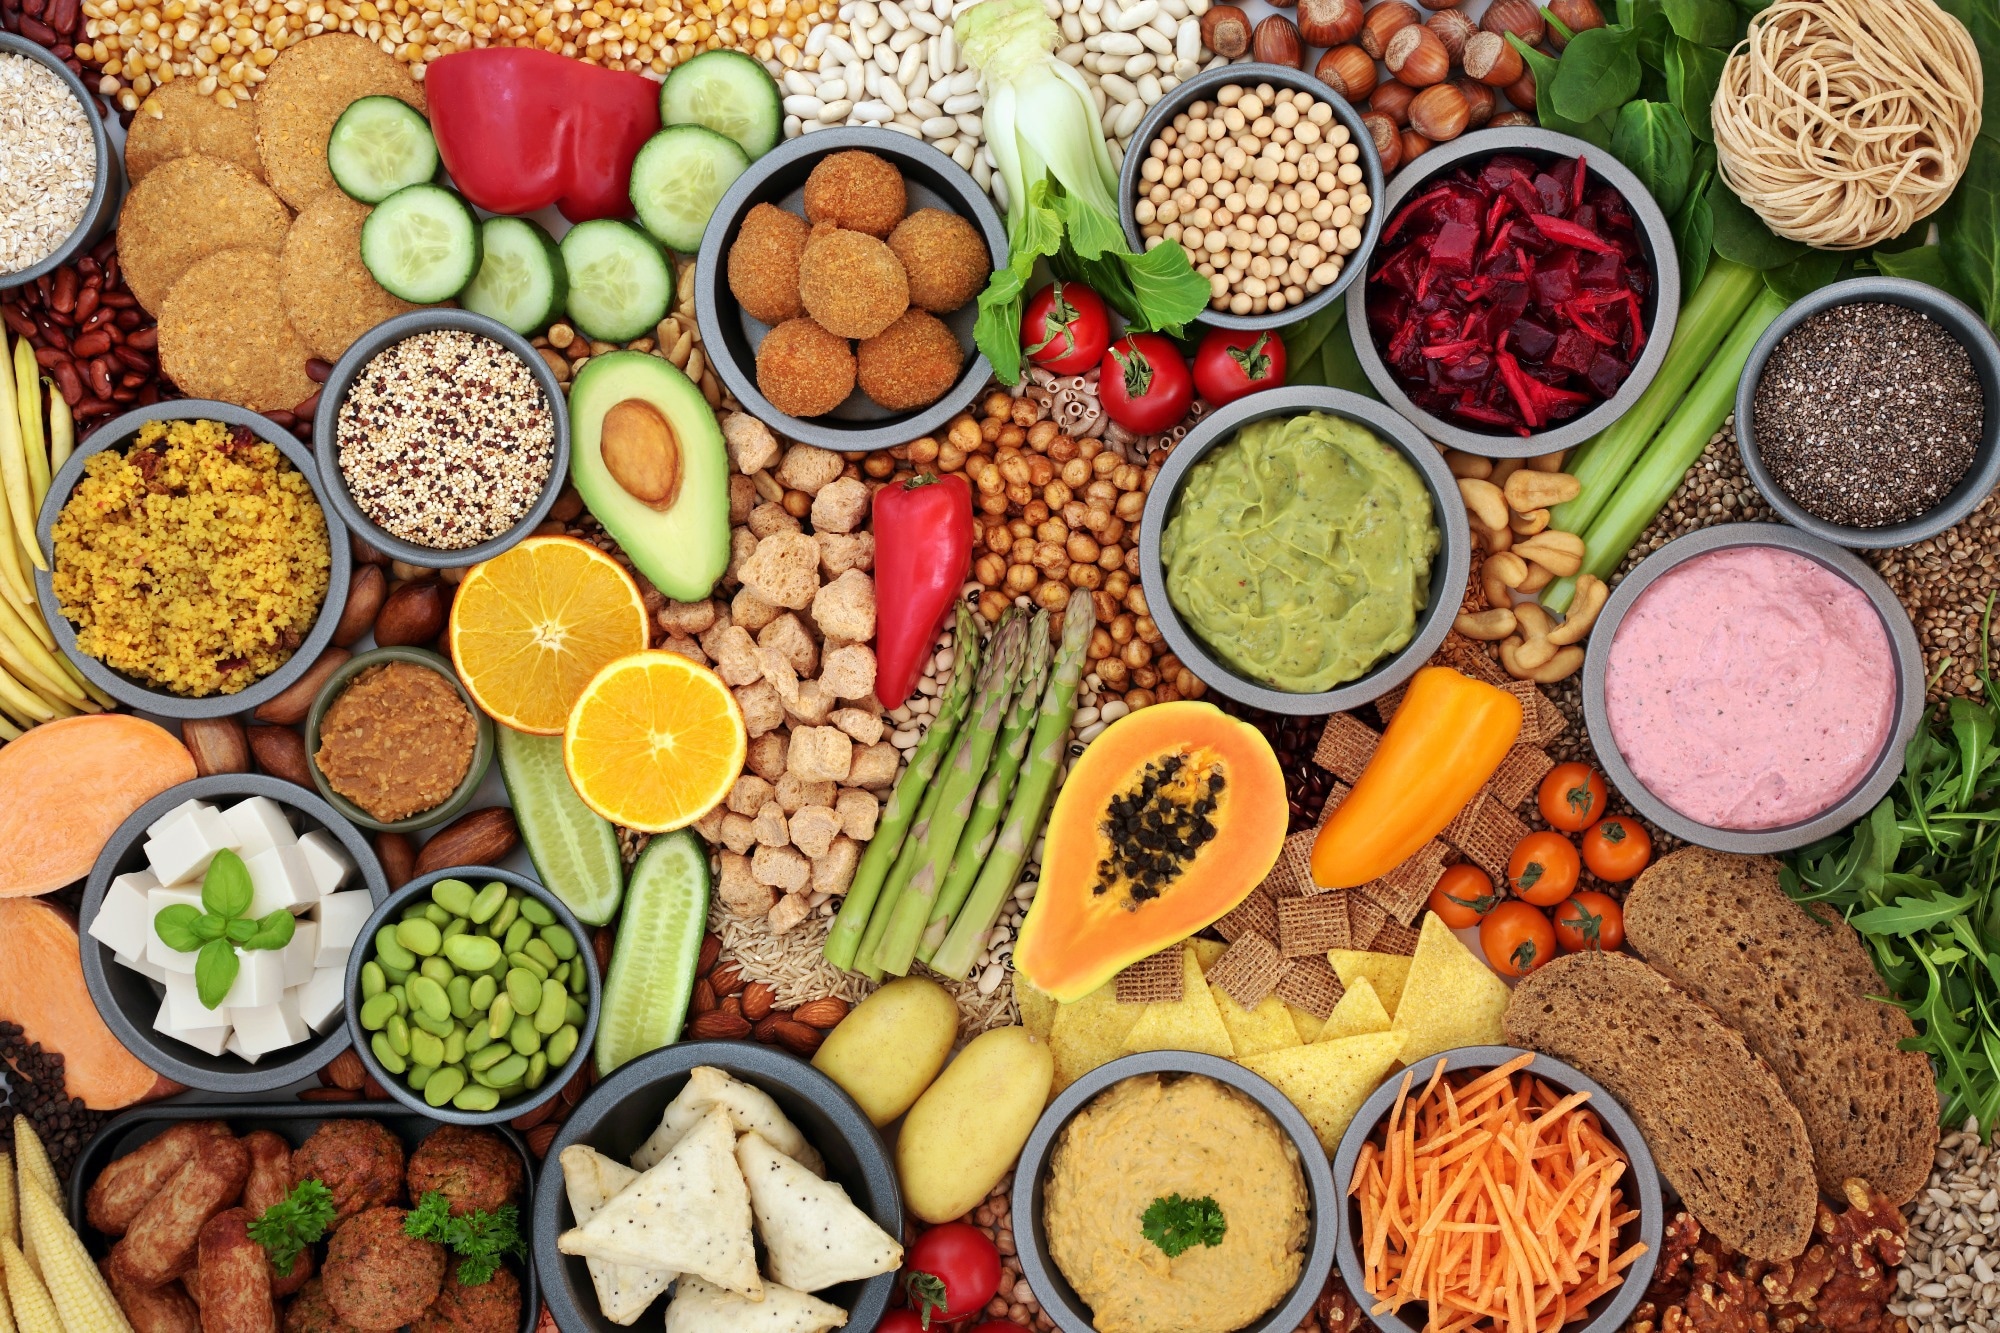 Study: Designing healthier plant-based foods: Fortification, digestion, and bioavailability. Image Credit: marilyn barbone / Shutterstock.com